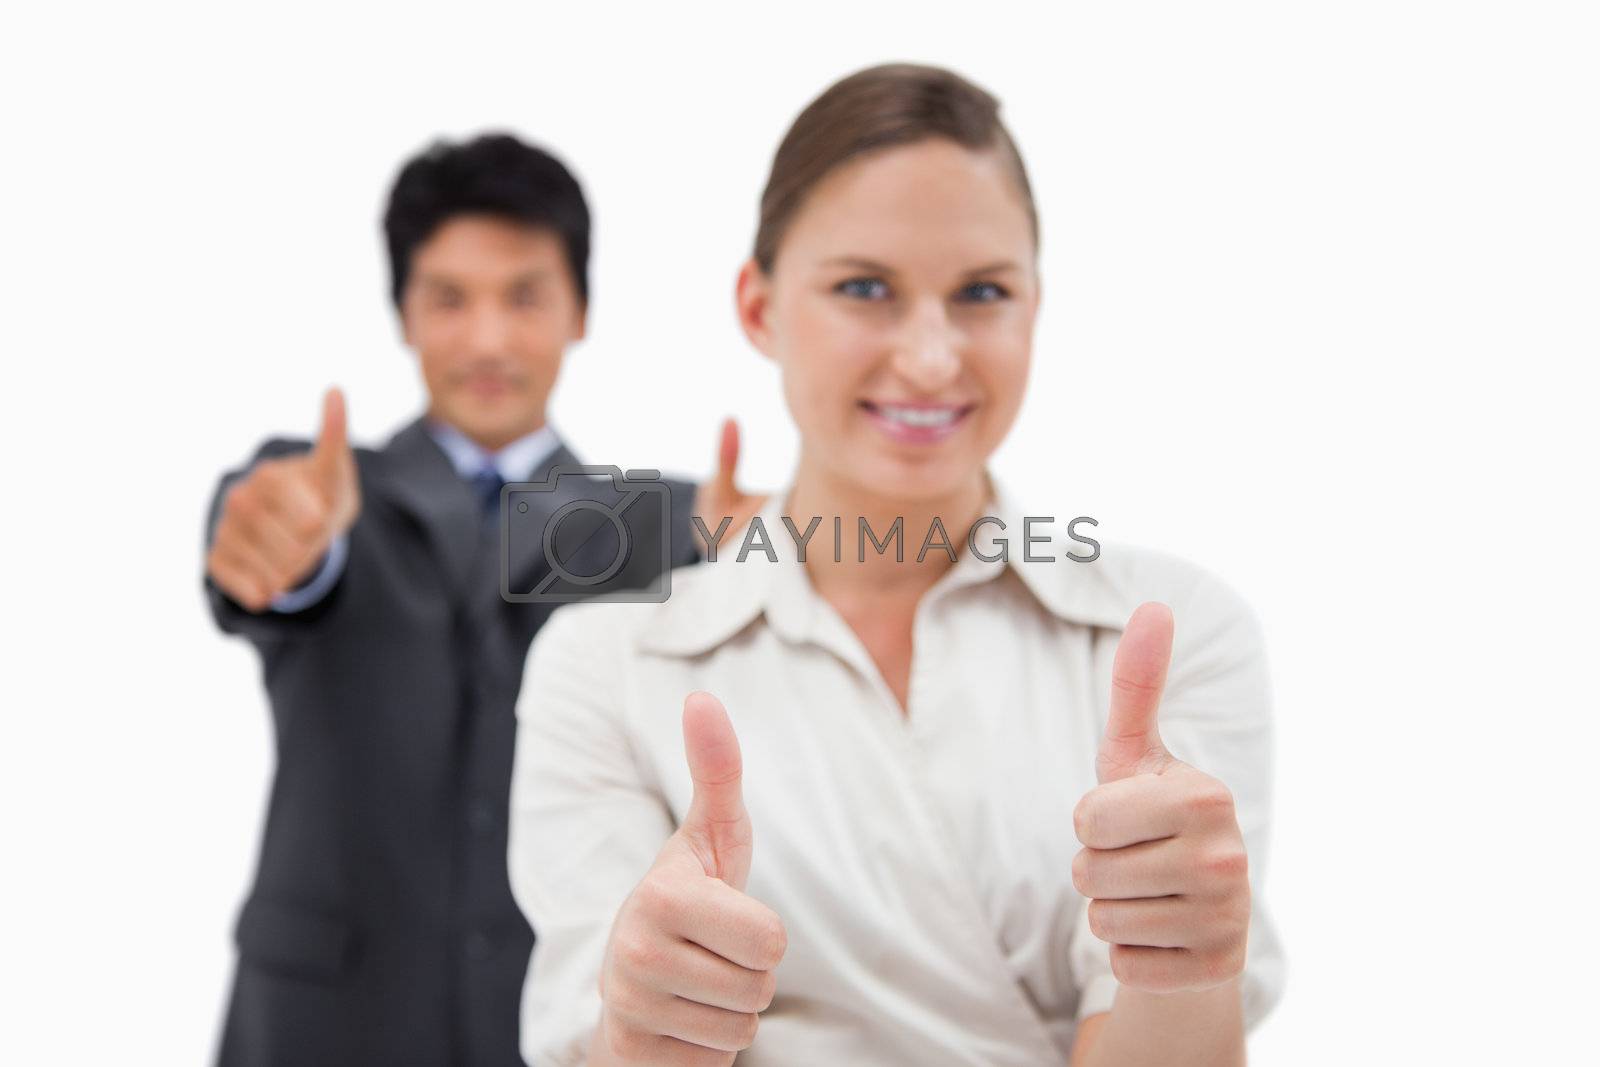 Royalty free image of Smiling business people with the thumbs up by Wavebreakmedia